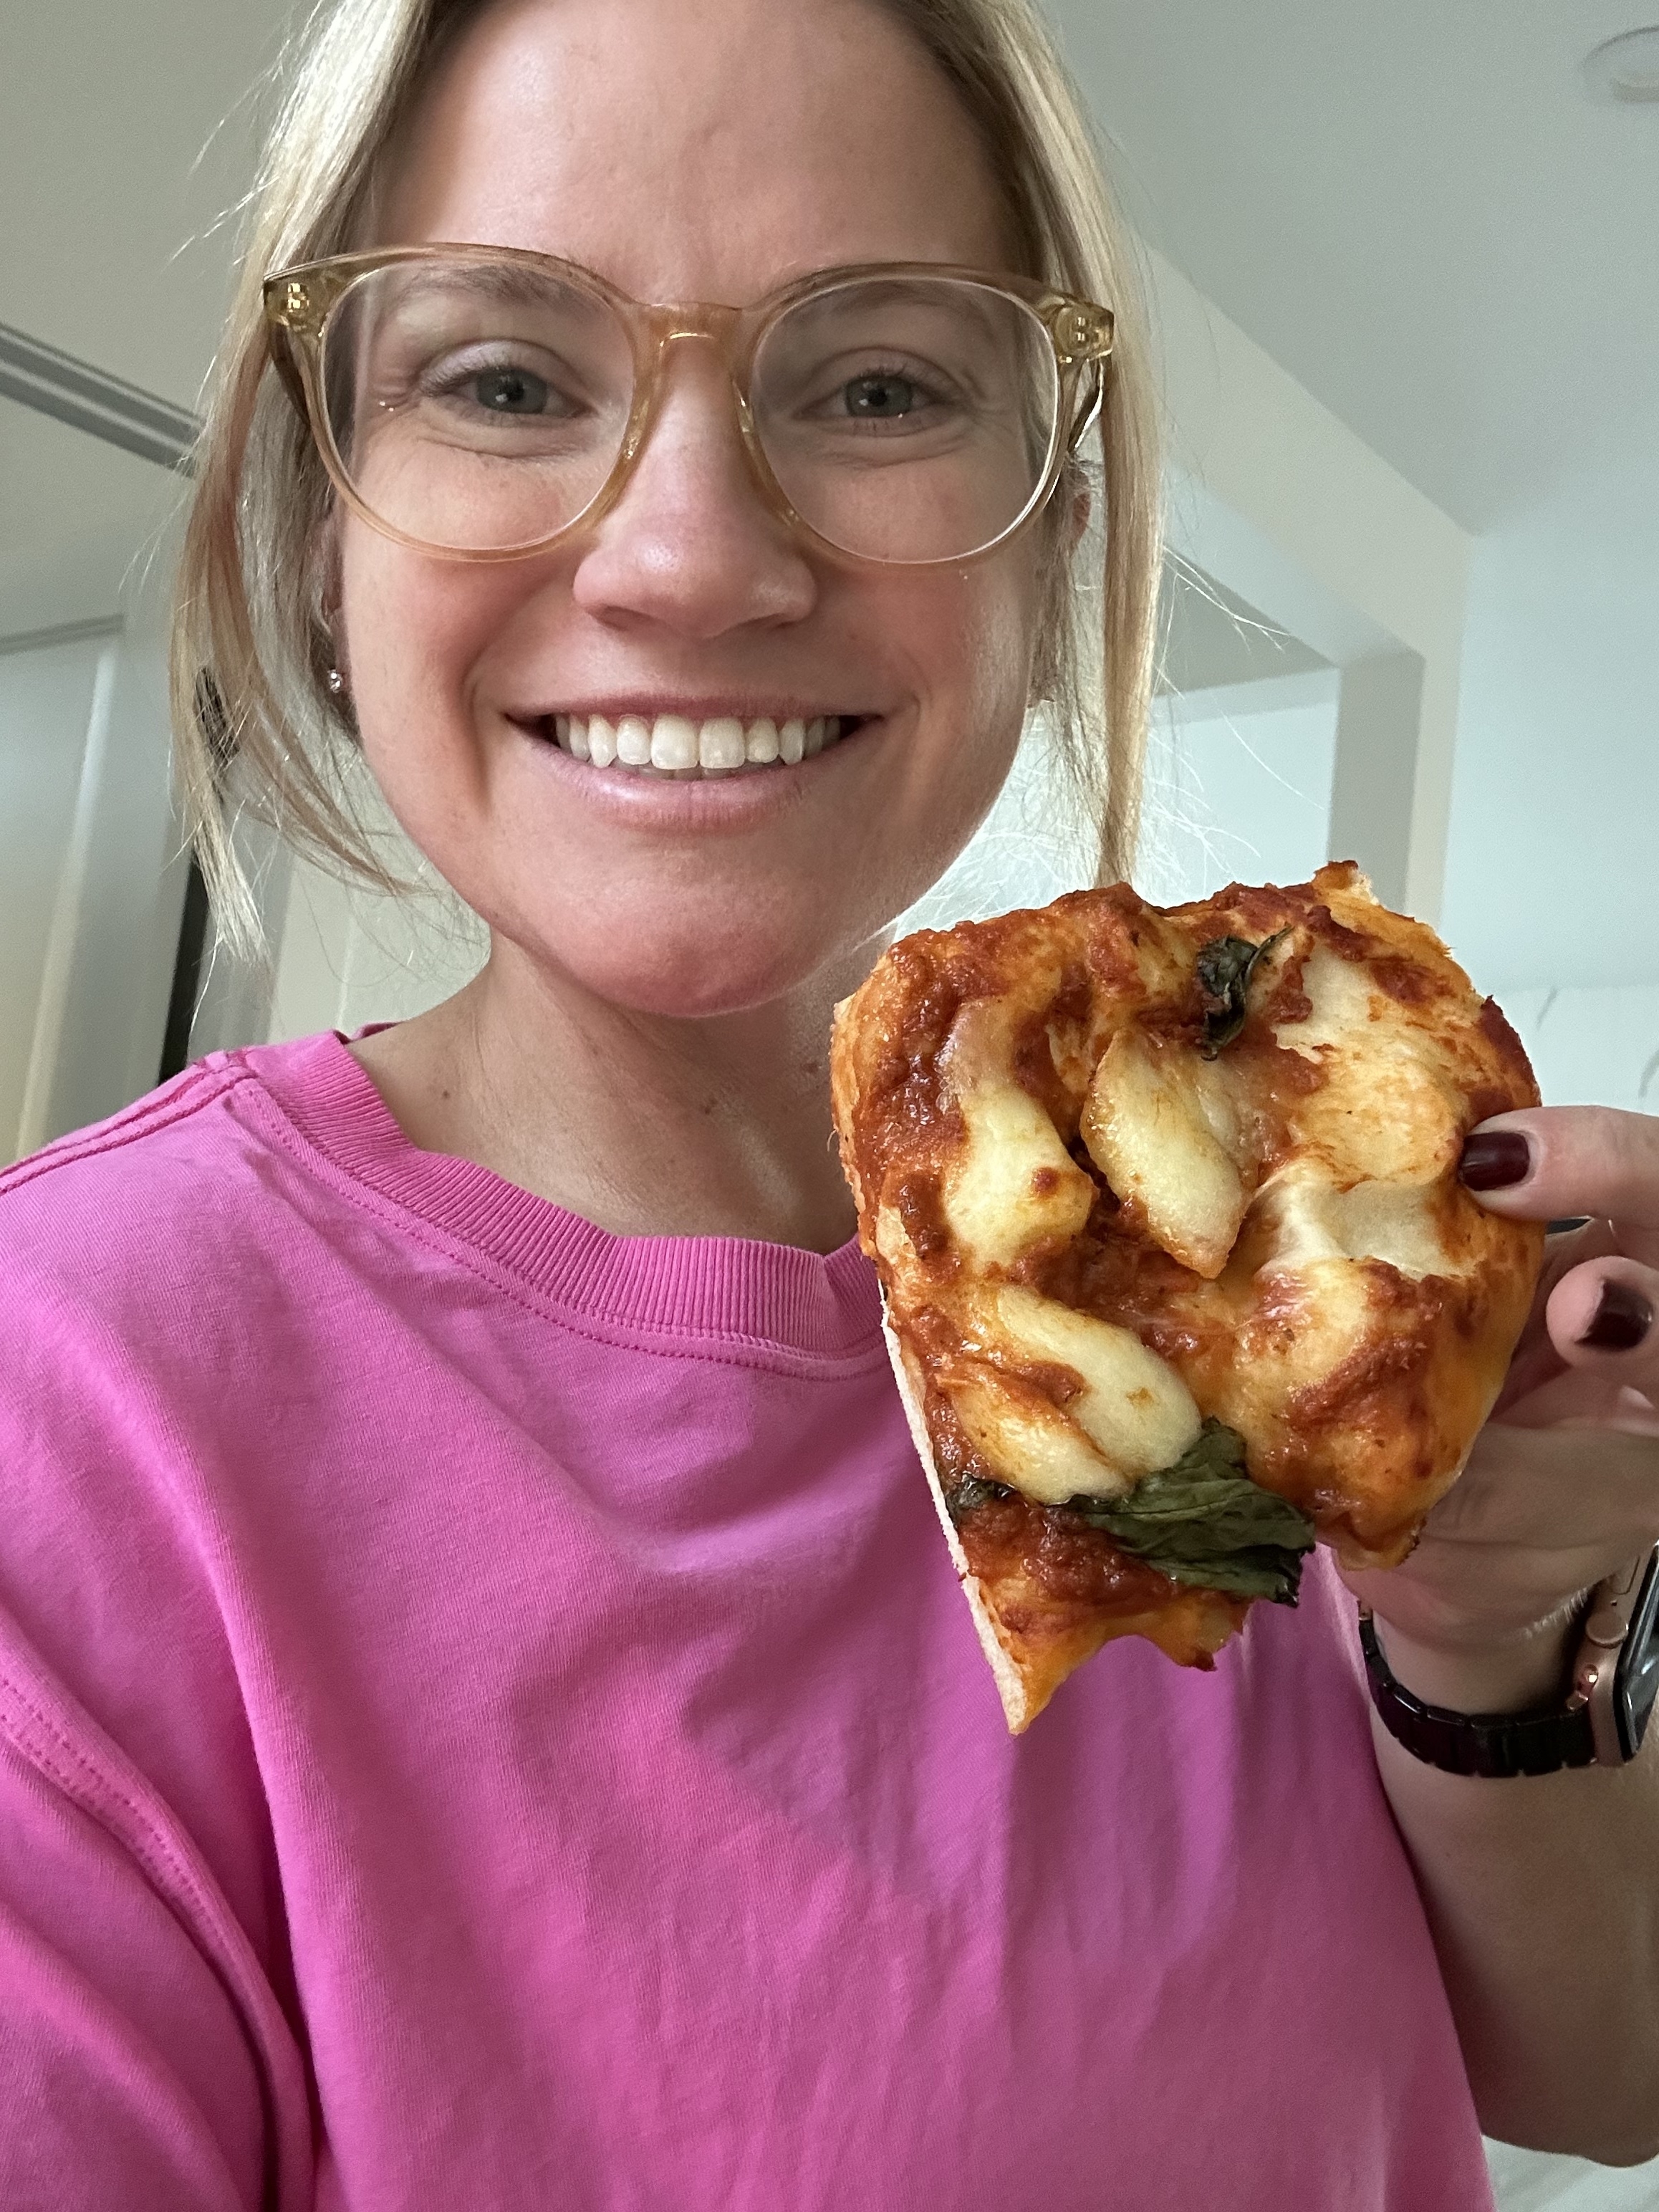 the author holding a piece of pizza